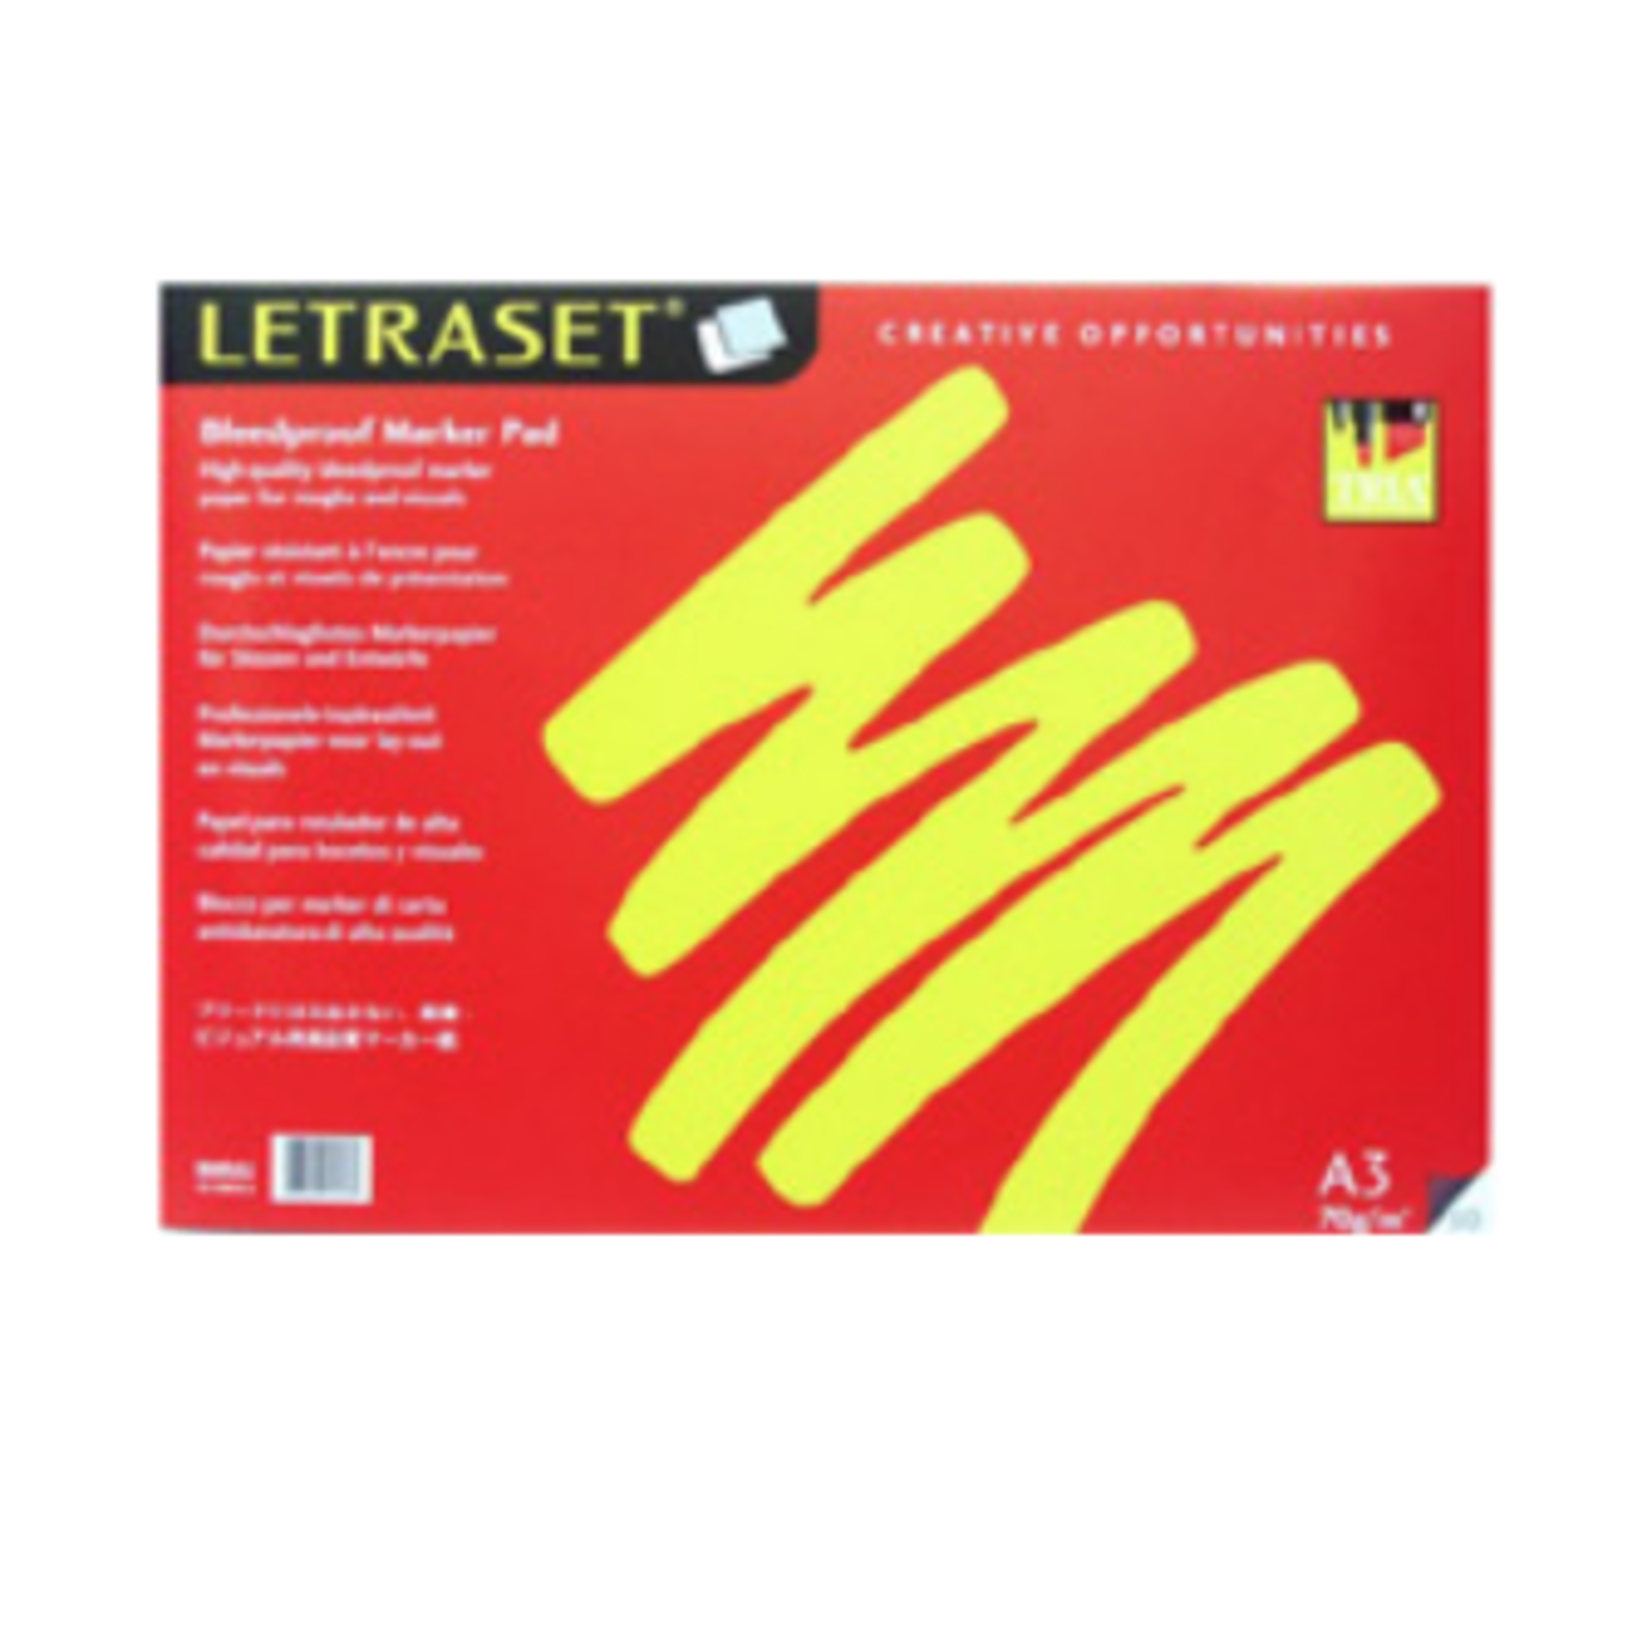 LETRASET BLEEDPROOF MARKER PAD A2 23.4x16.5*